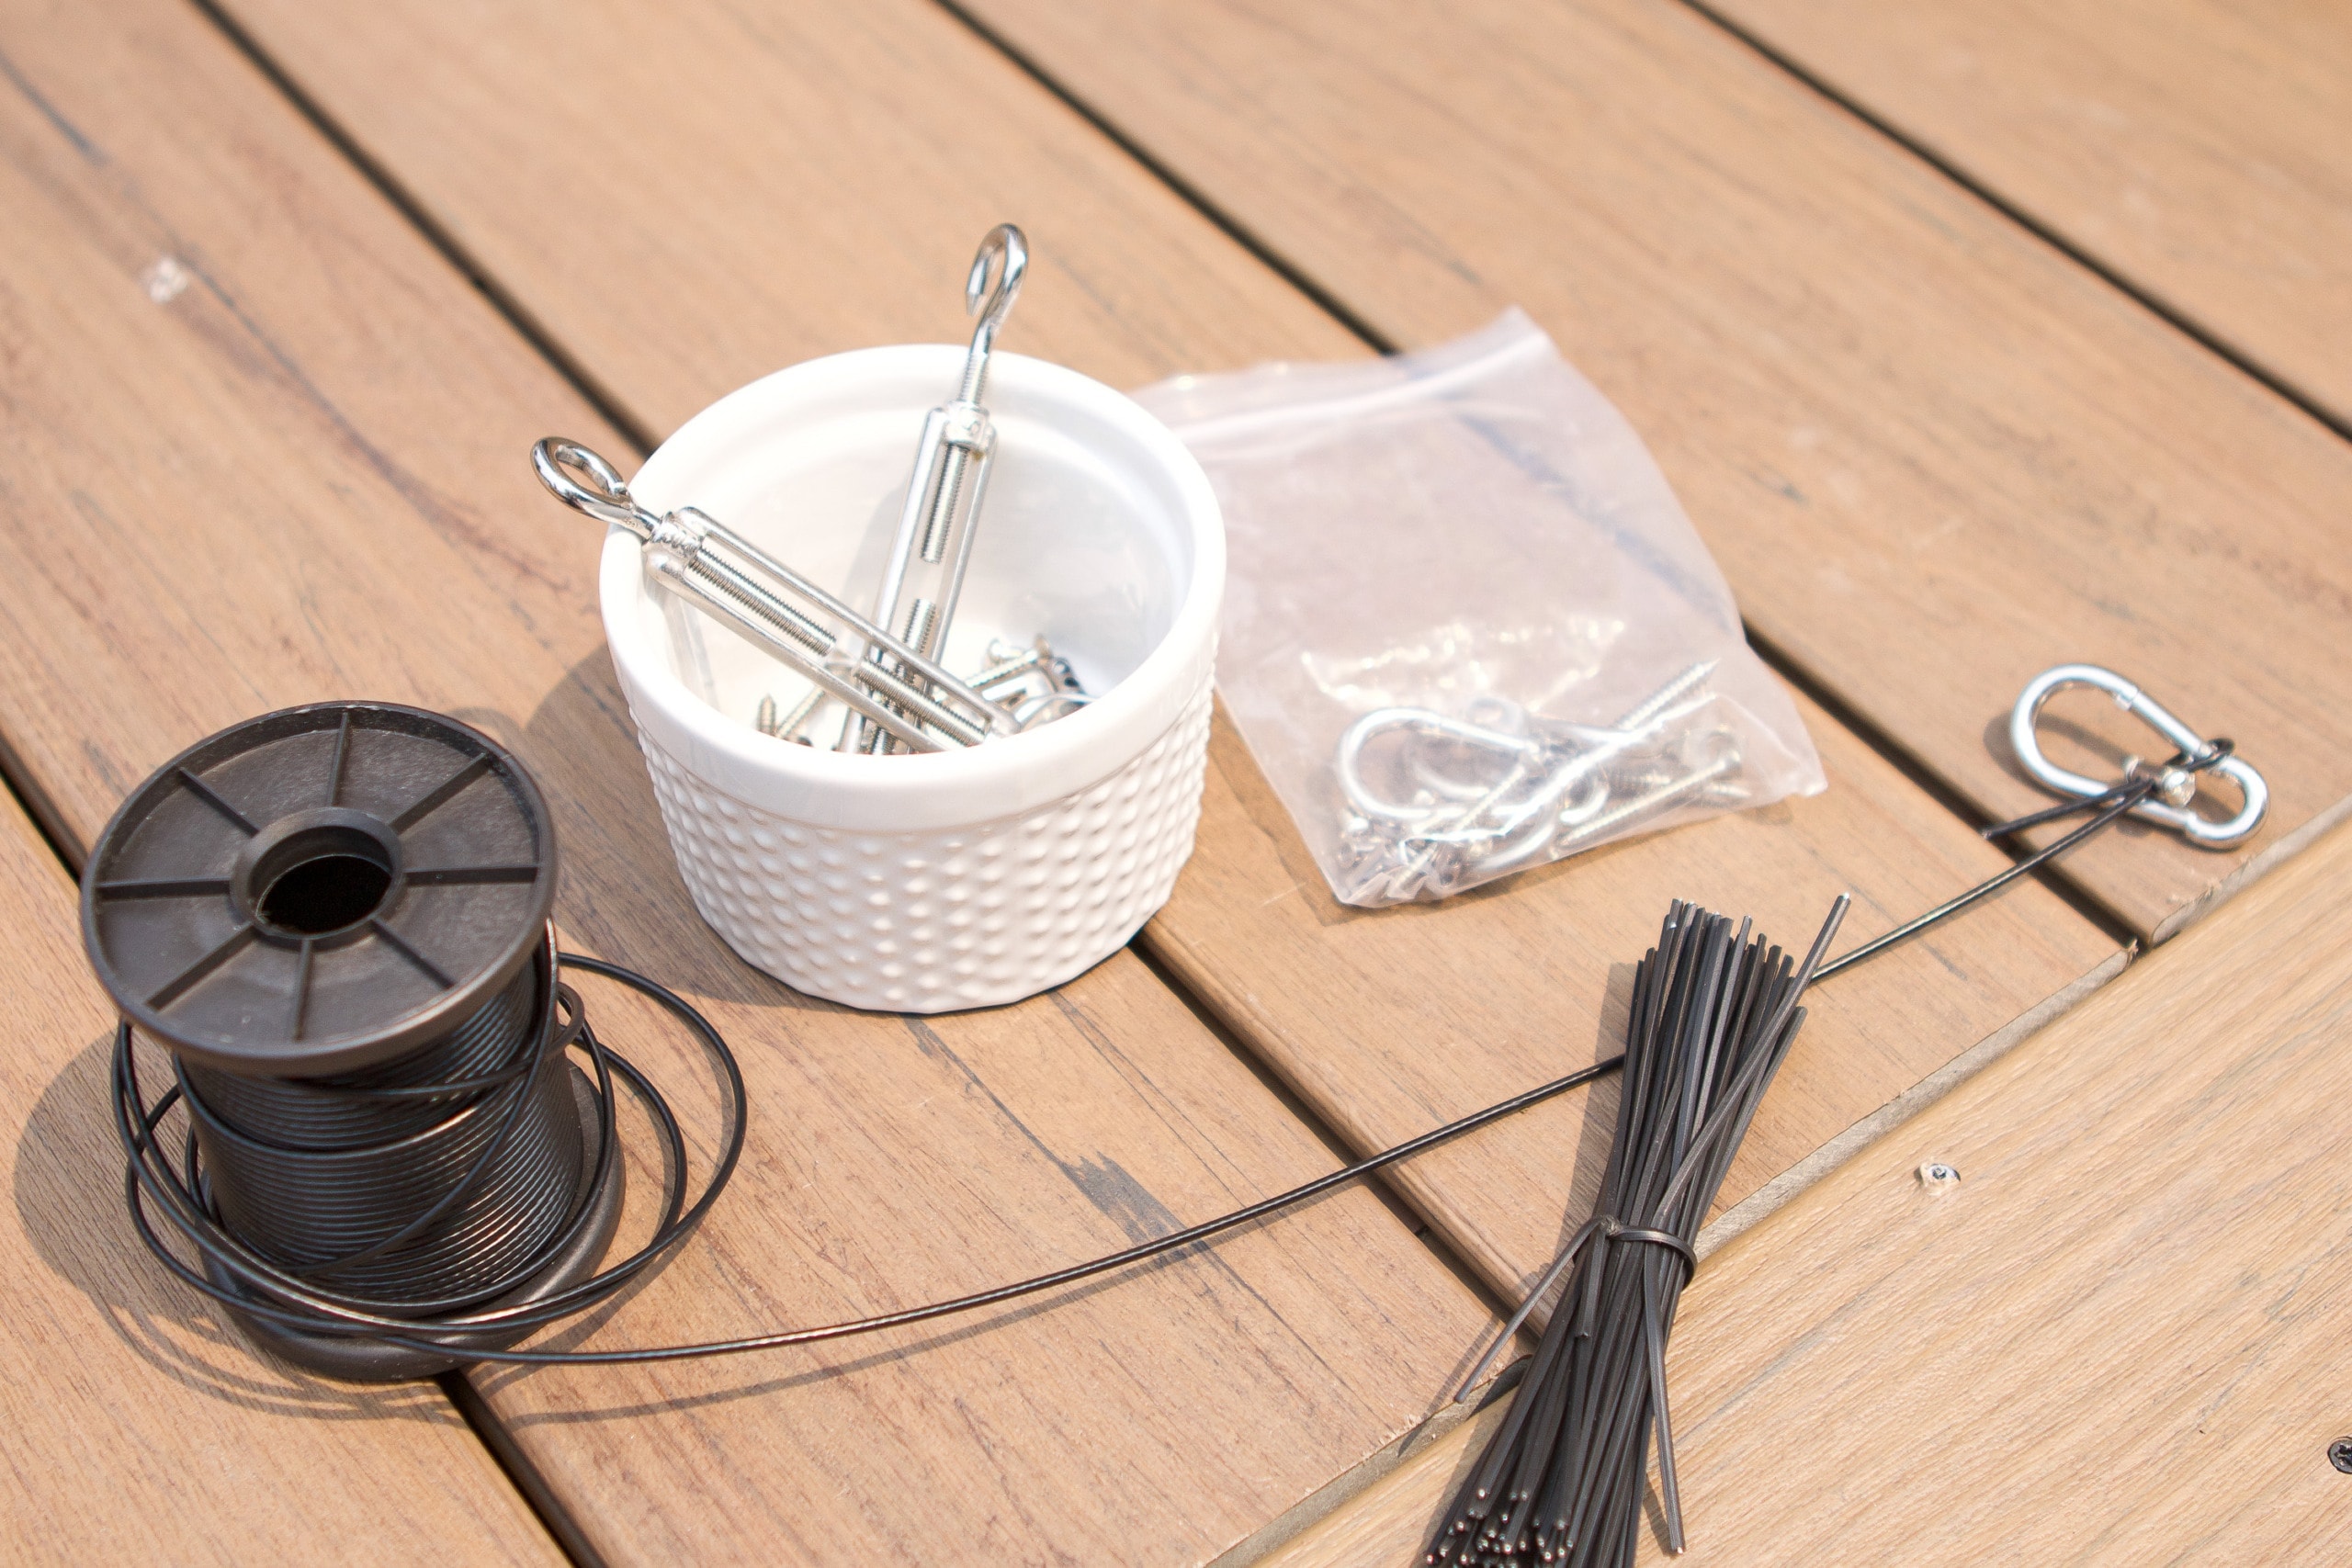 Kit to help when you install string lights